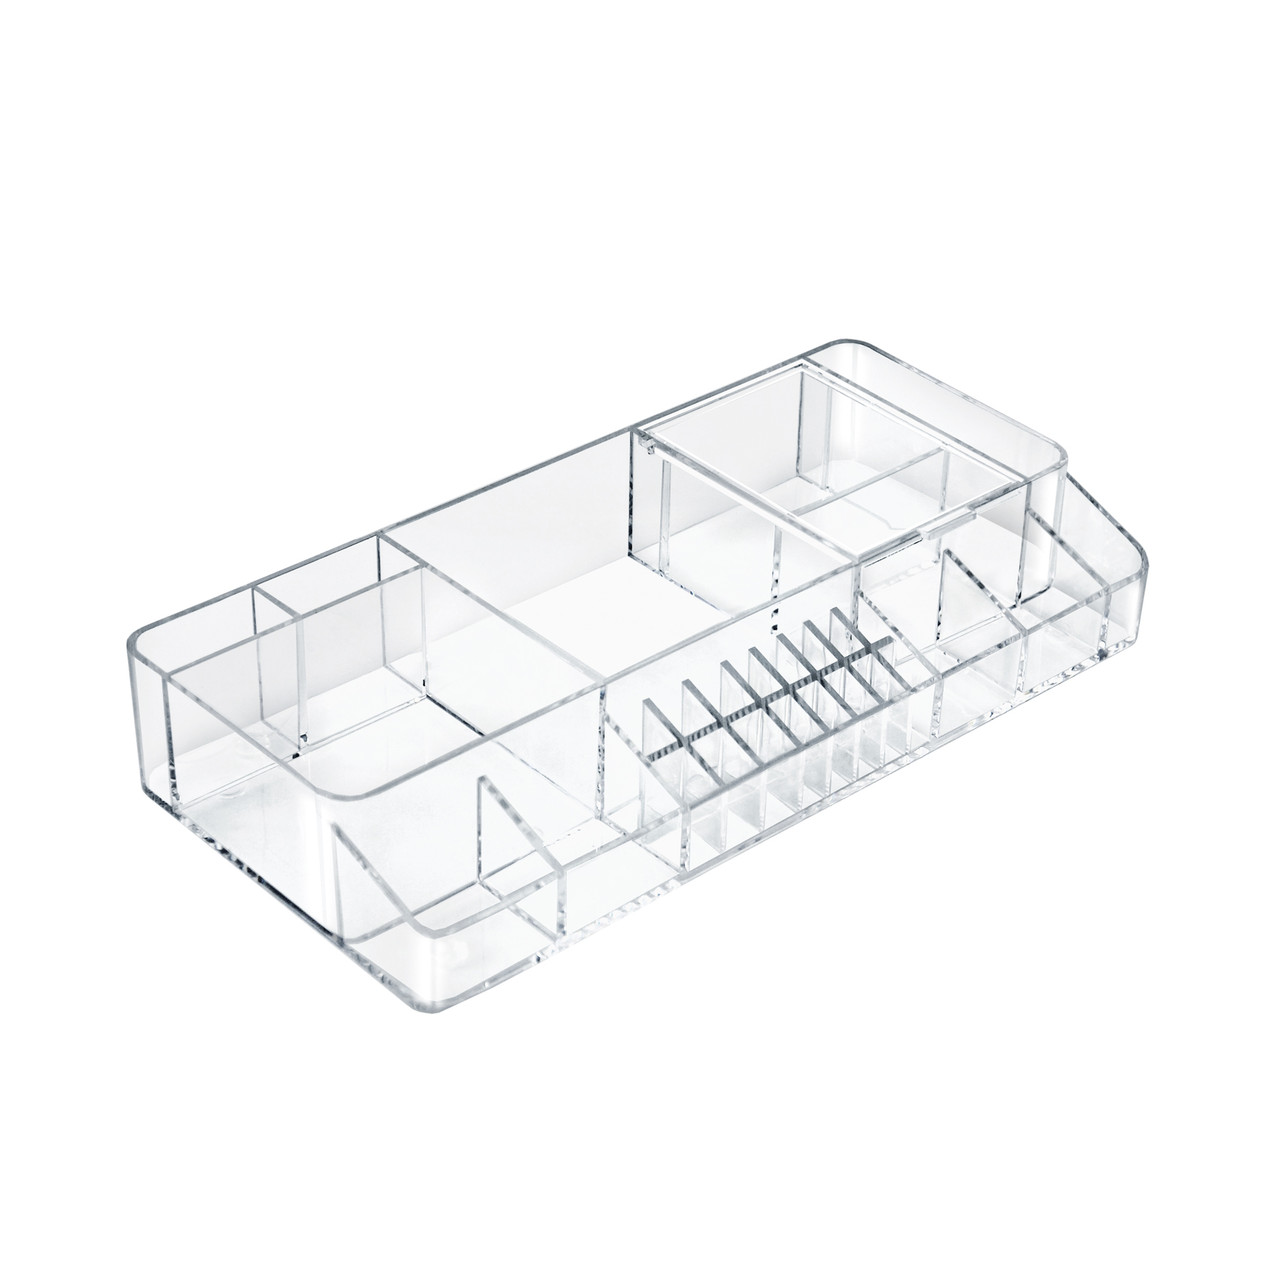 Azar Displays 252710 Small Clear Cosmetic Organizer for Counter